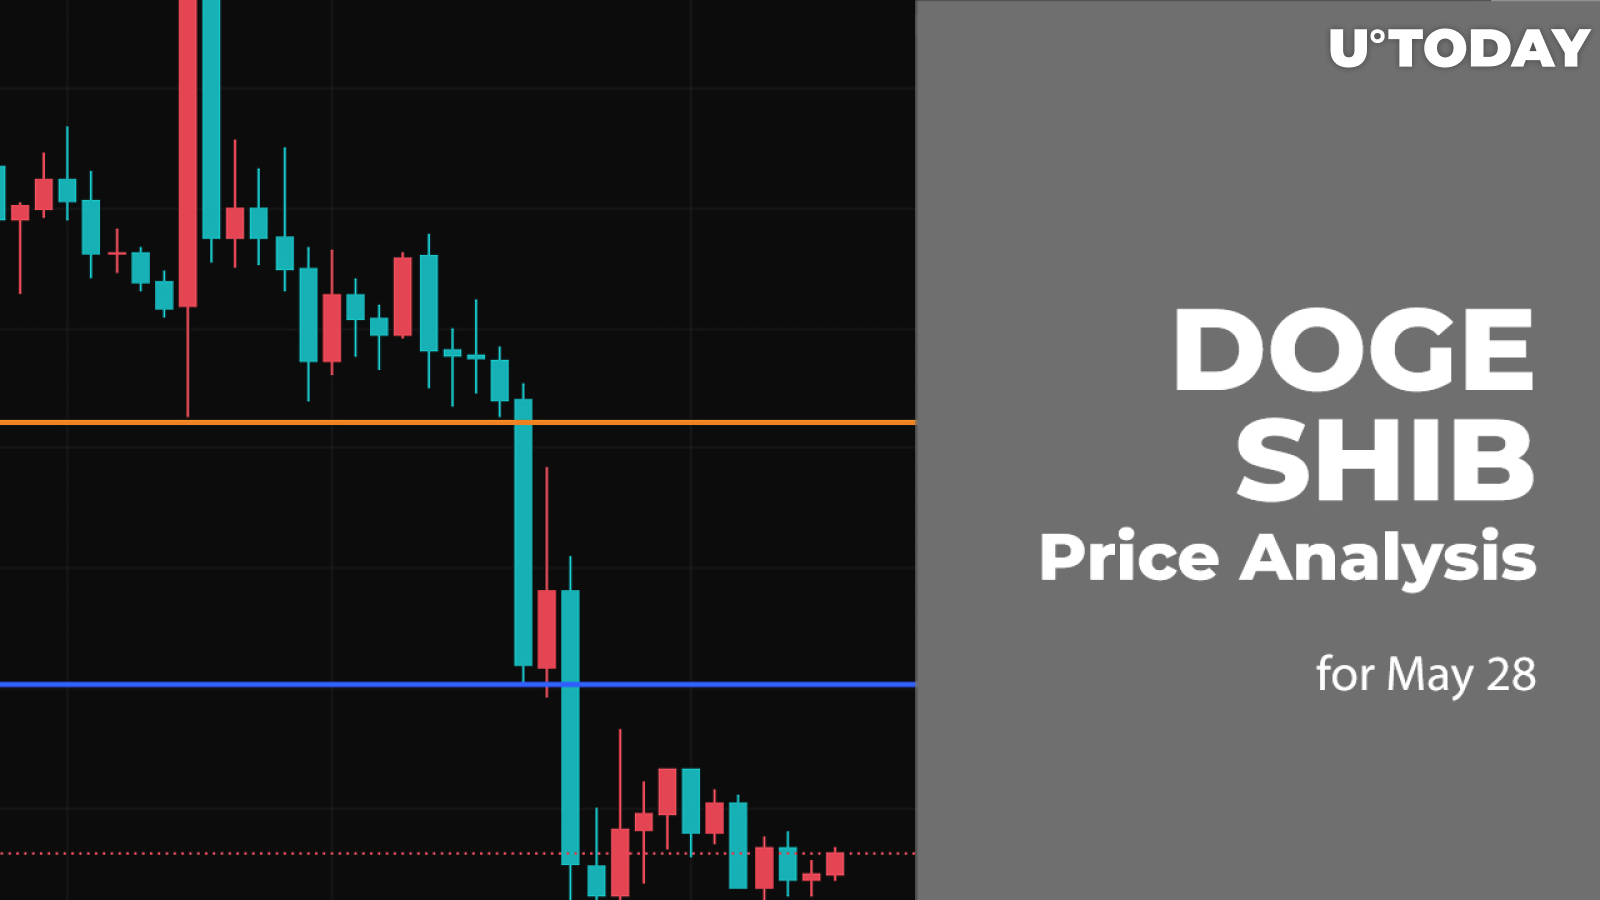 DOGE and SHIB Price Analysis for May 28